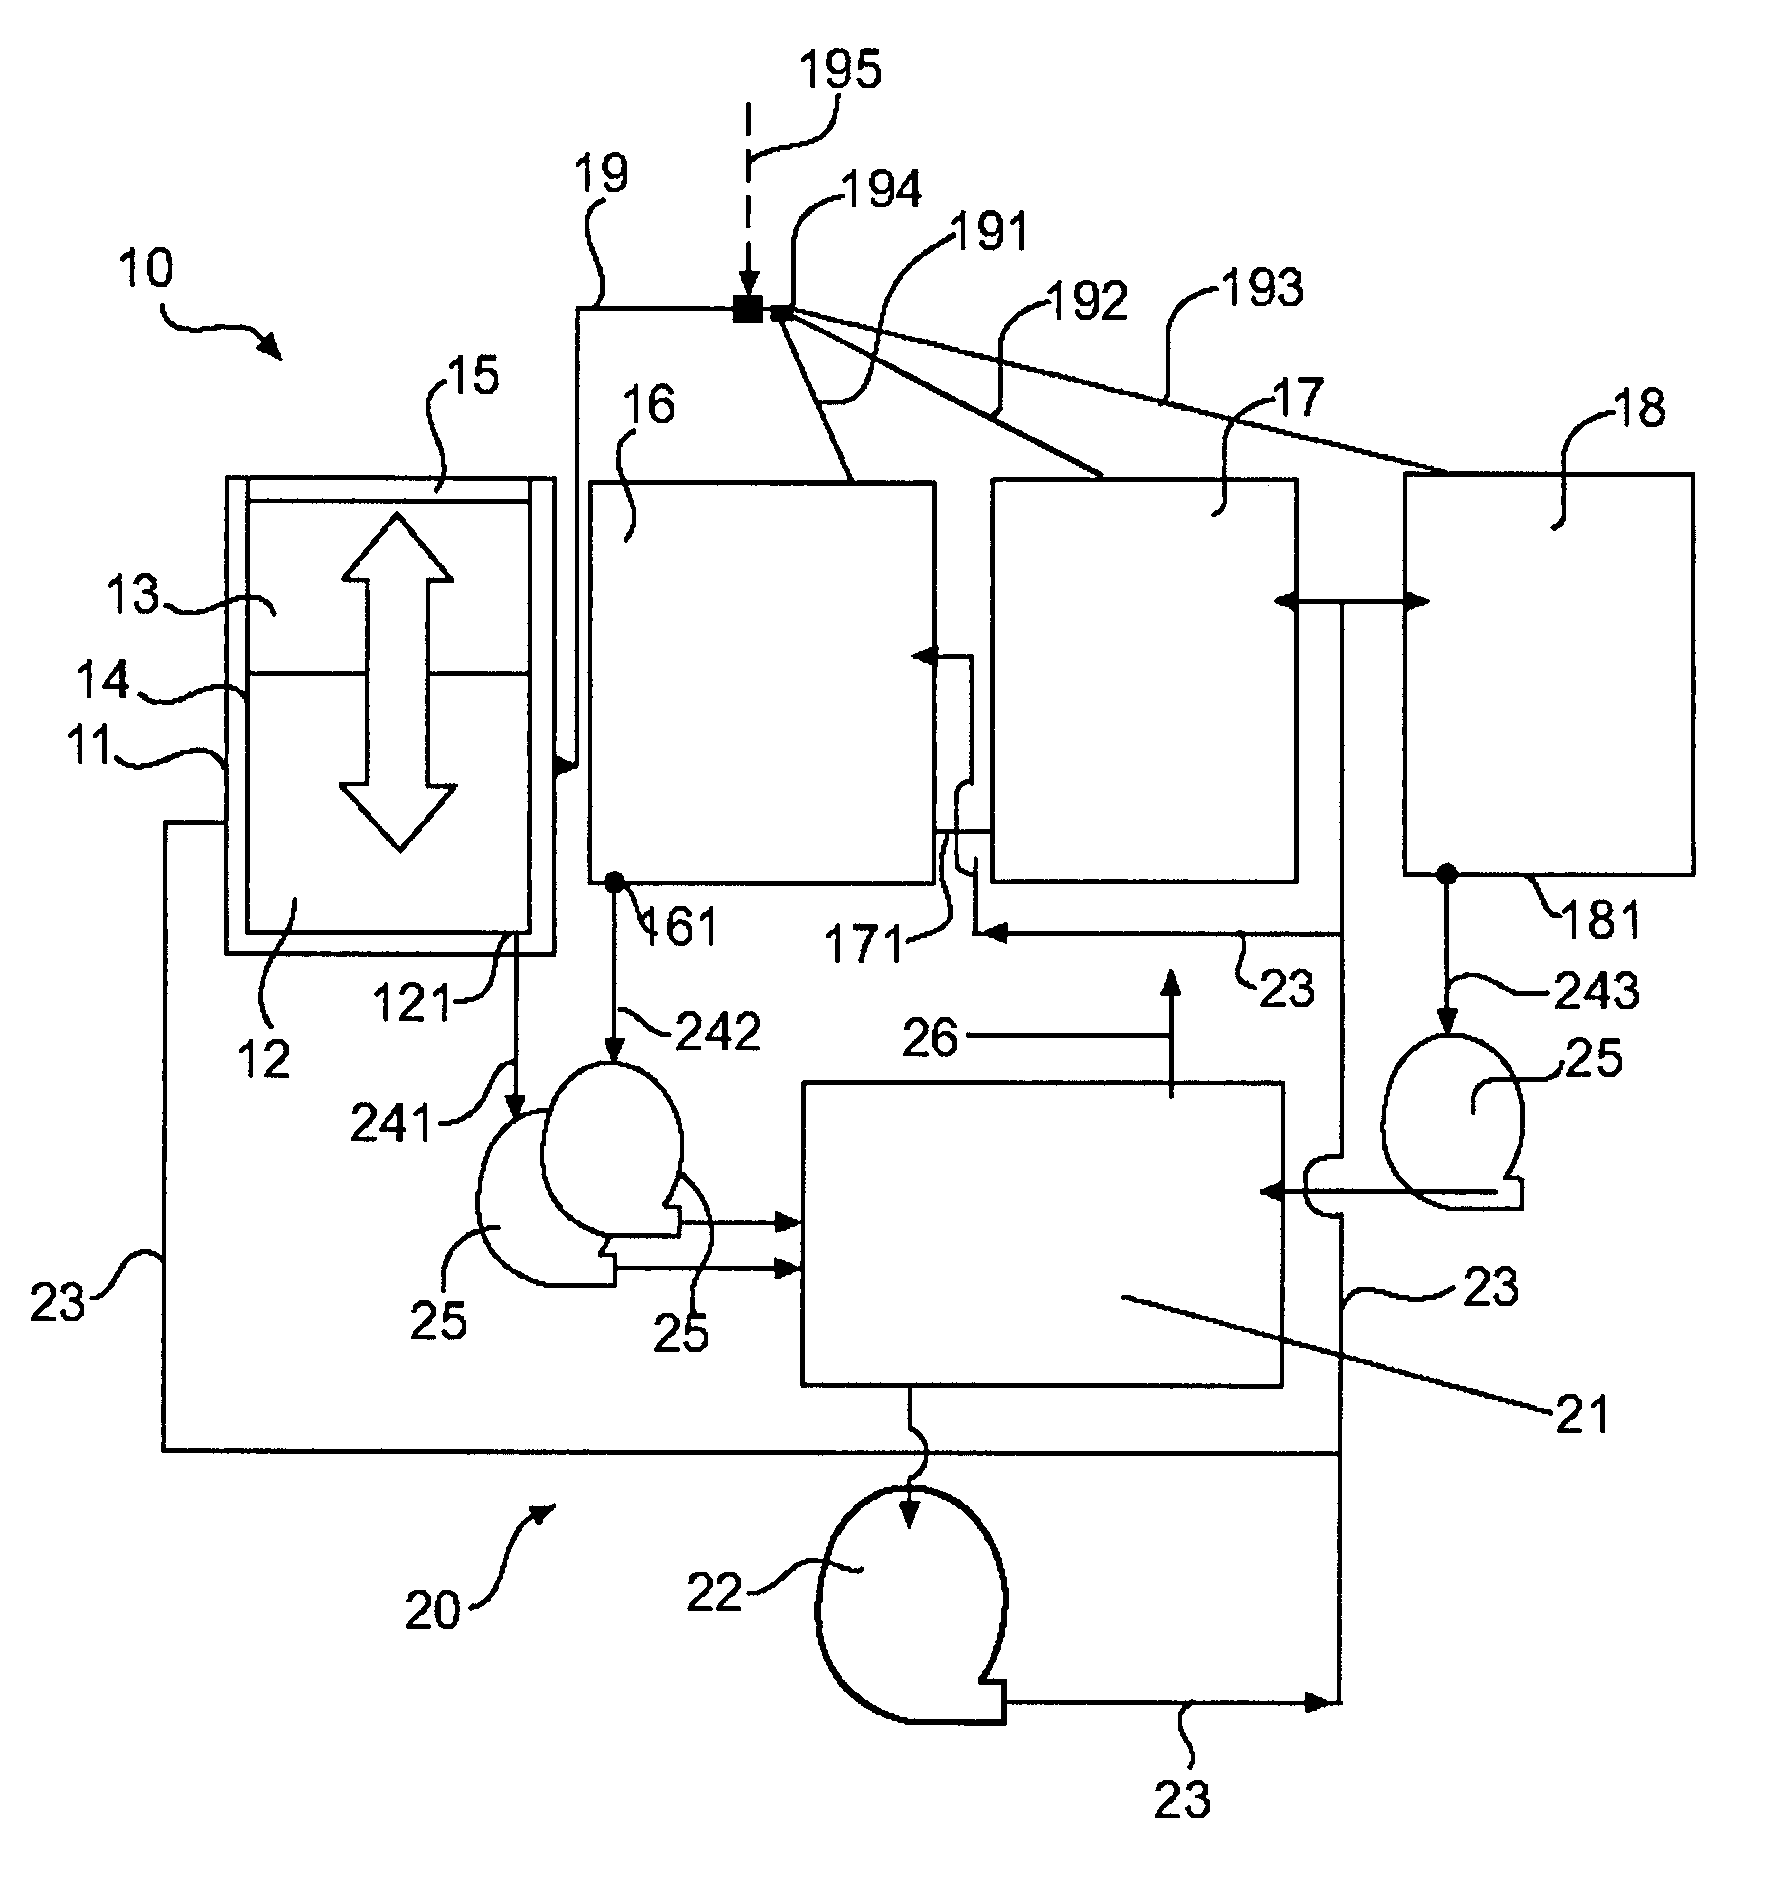 Lubrication system for a power plant